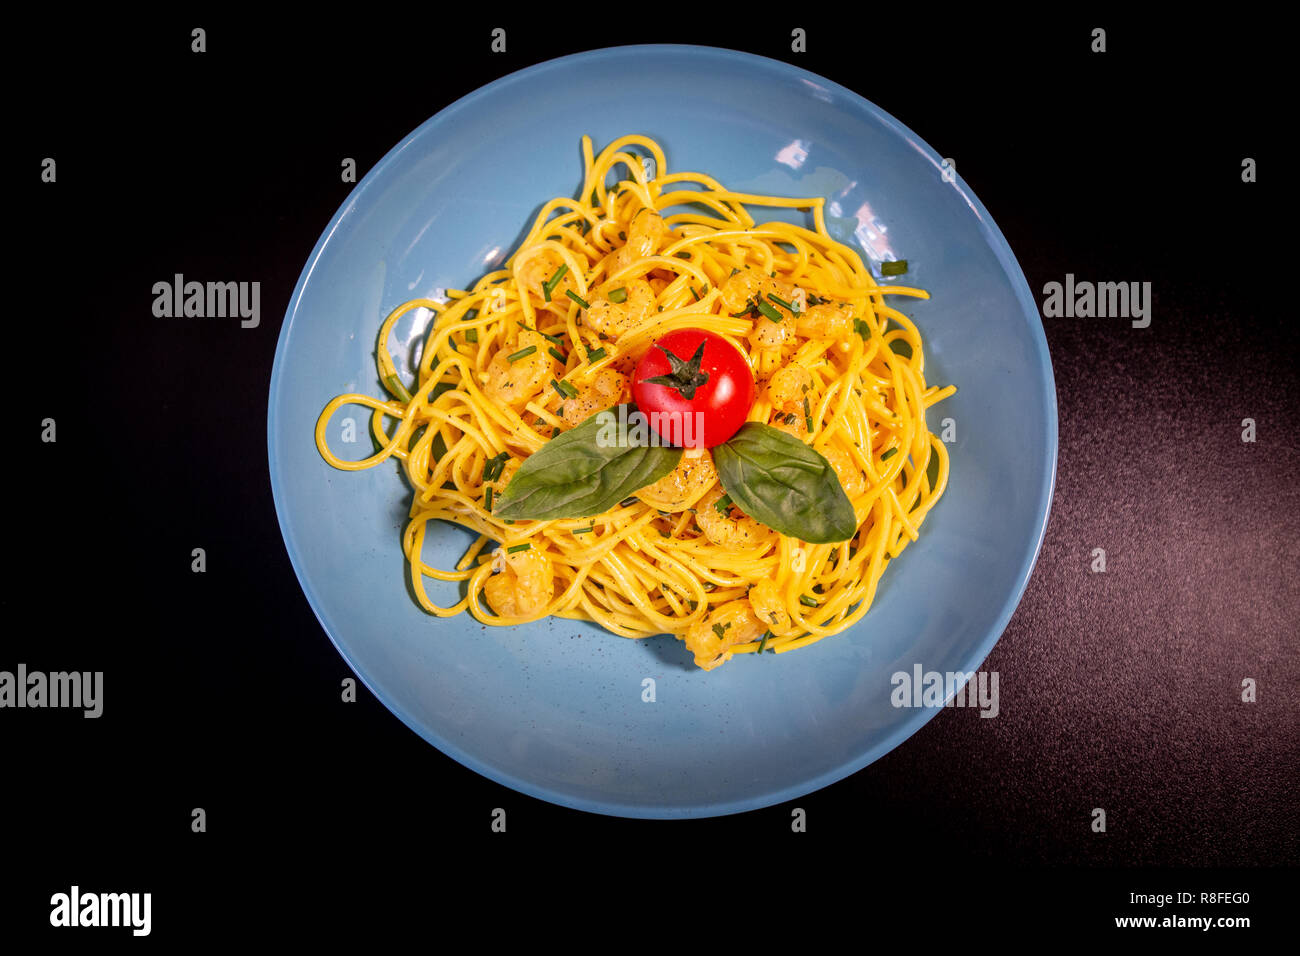 Top view of yellow spaghetti with prawns, a cherry tomato and basil in a blue plate on a black table. Stock Photo